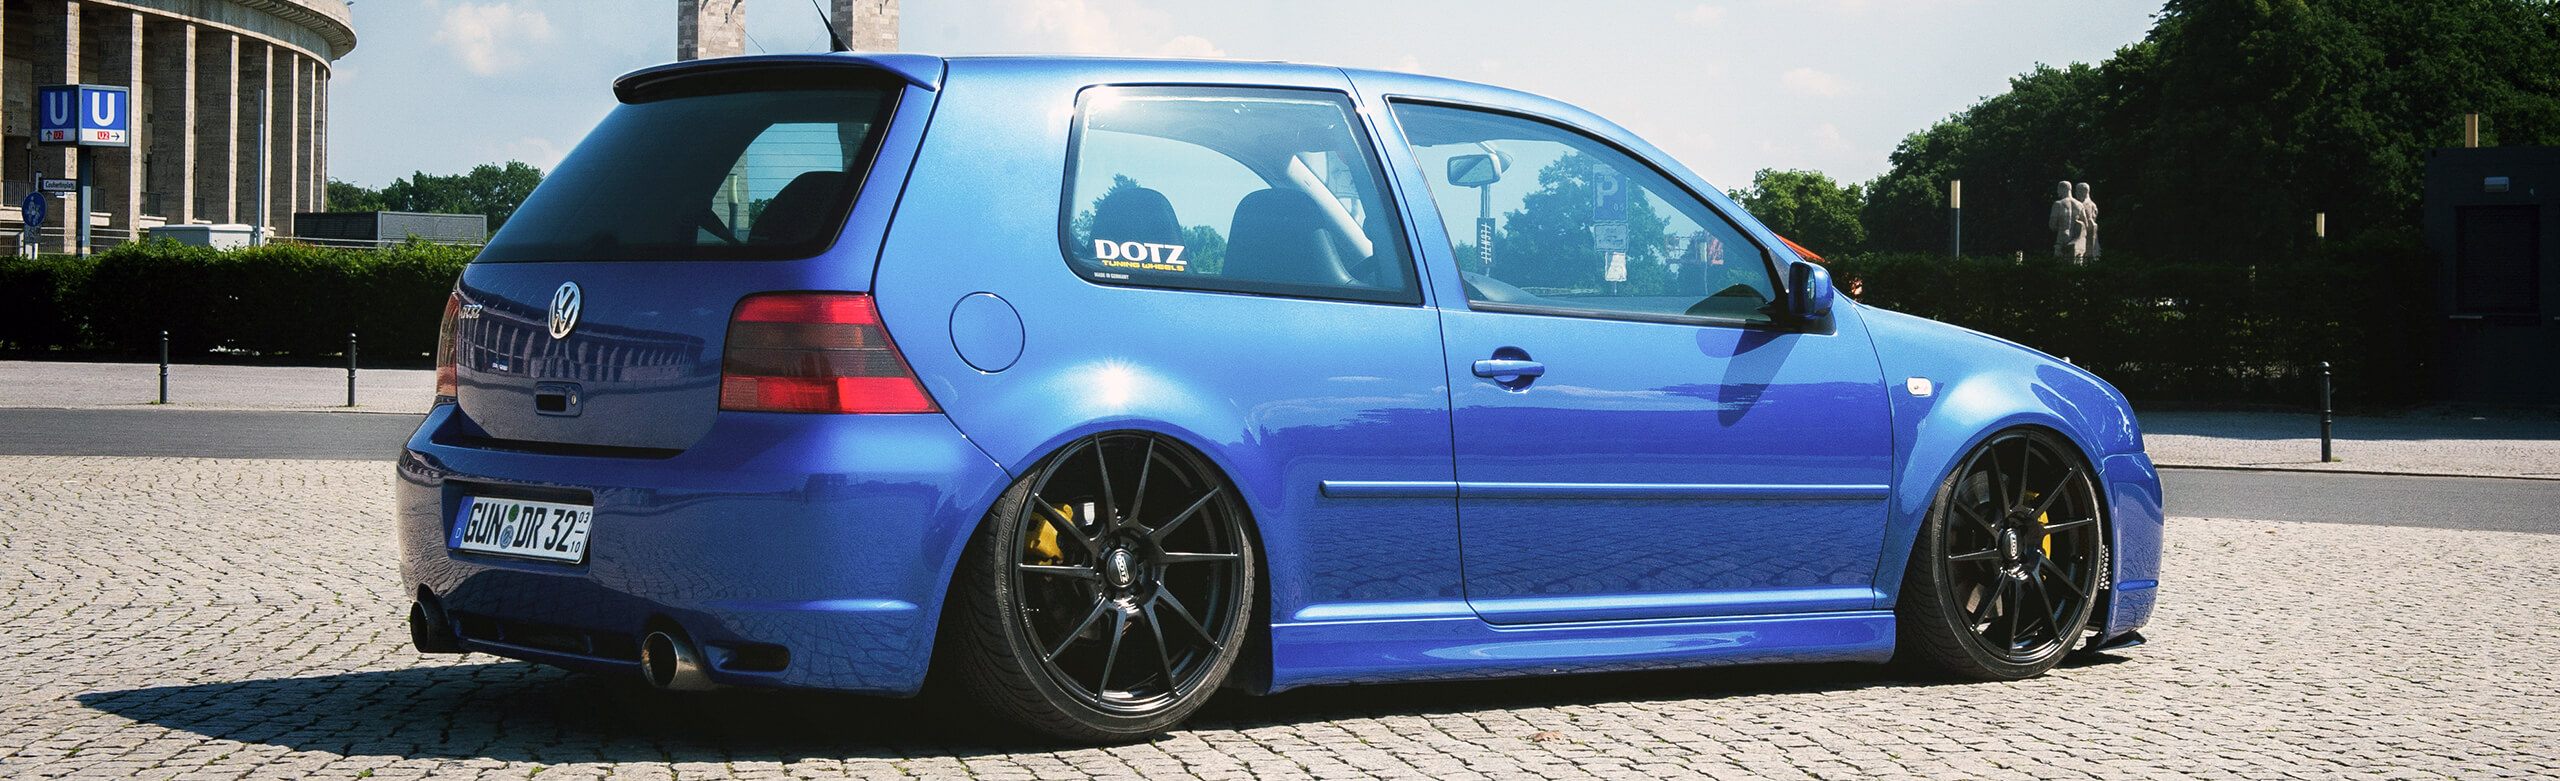 VW Golf mk4 Tuning pictures - VW Tuning Mag